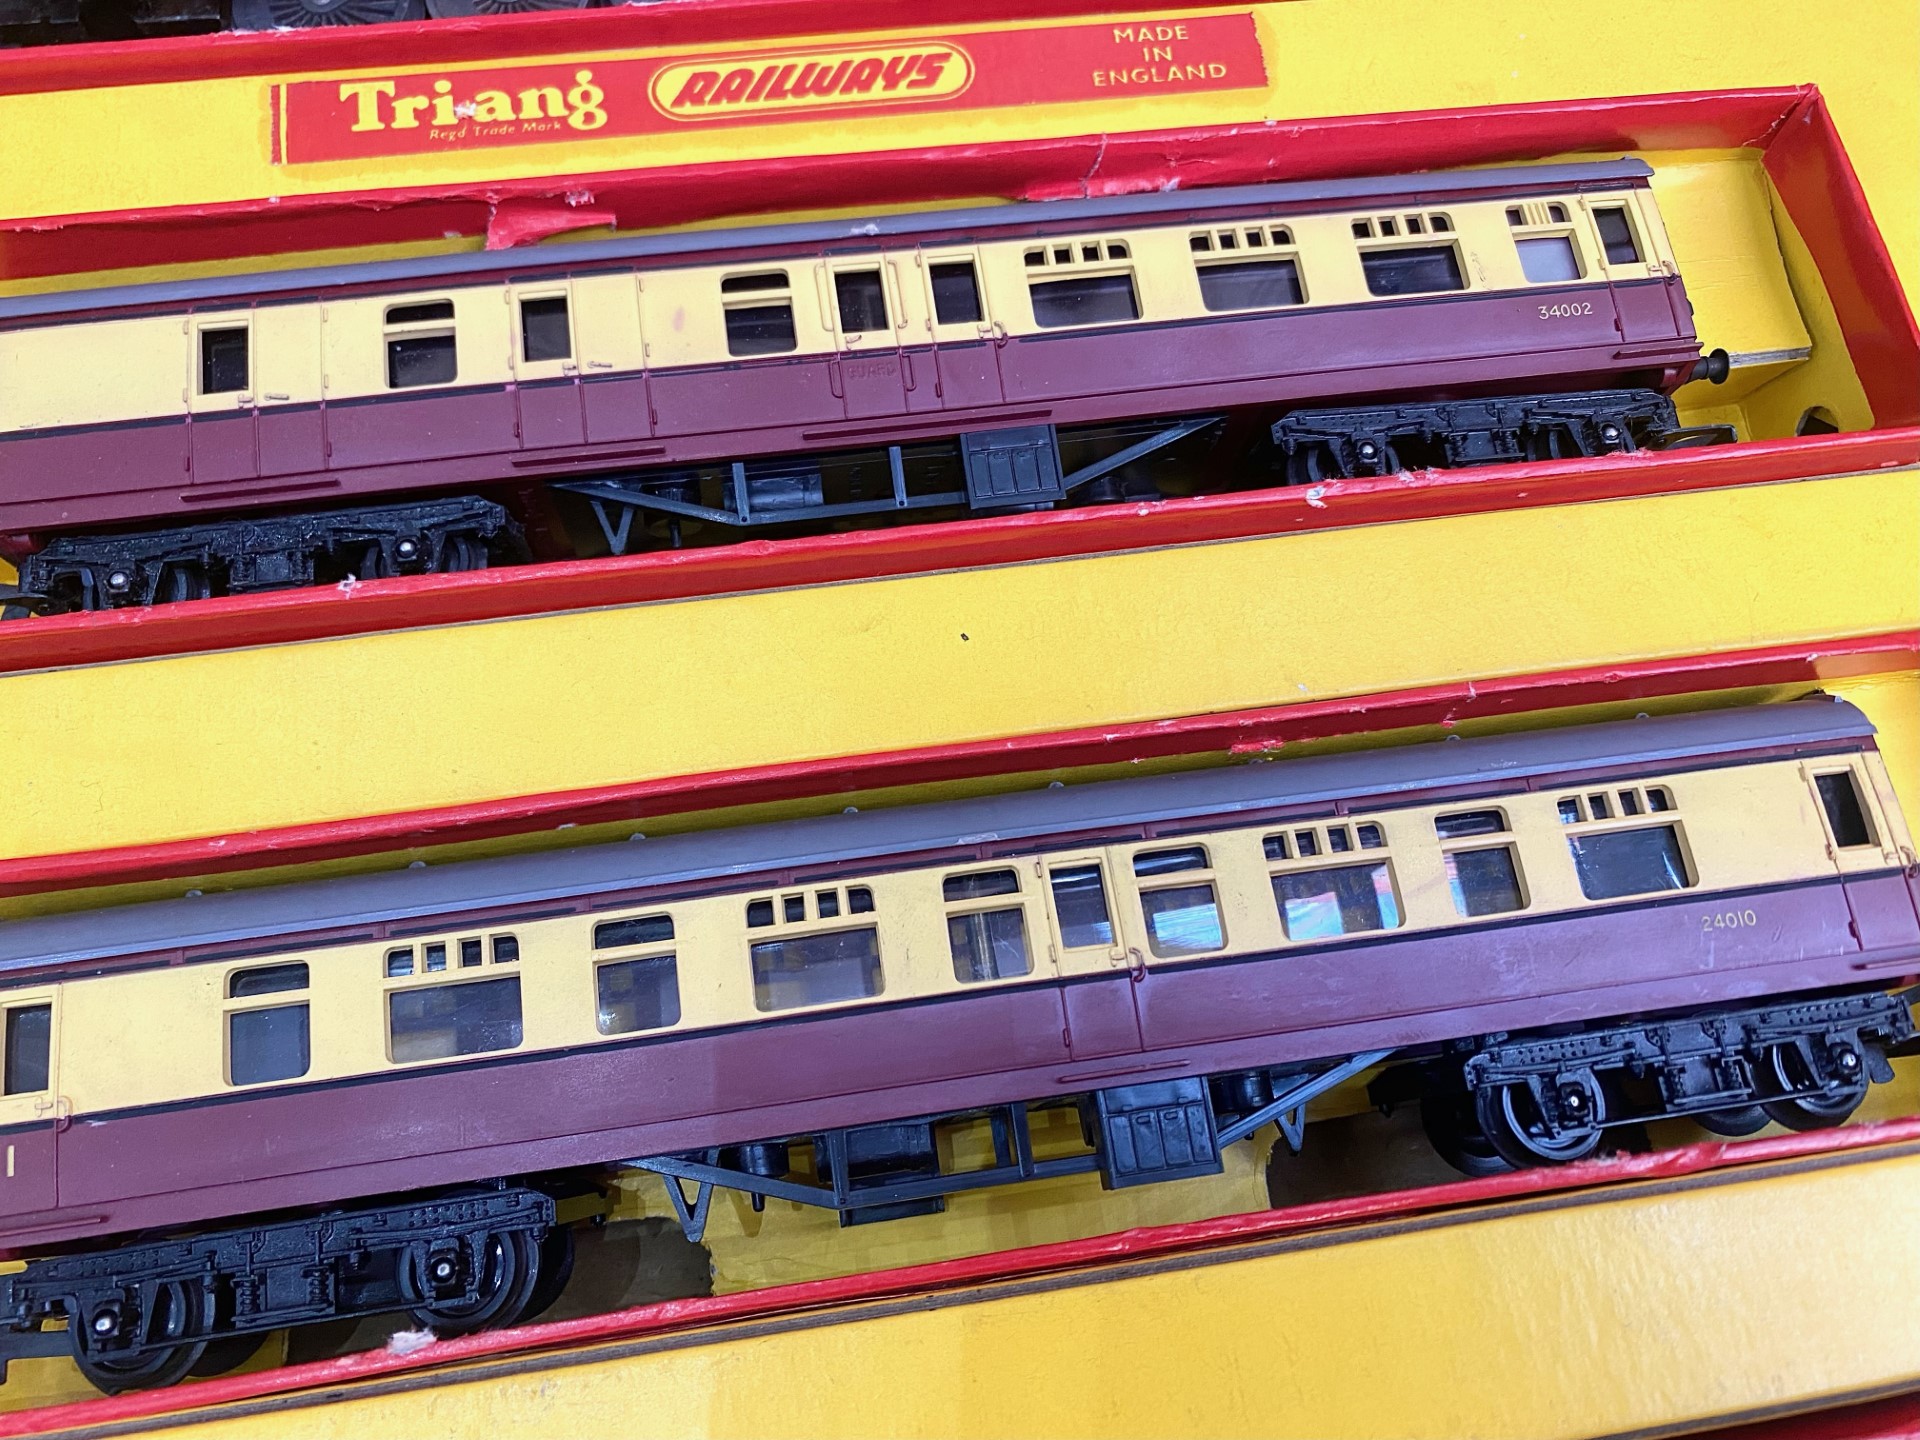 Triang Boxed Train Set ' R.S-1 ' Triang Electric Model Railway Train Set, OO Gauge, In Original Box, - Image 2 of 3